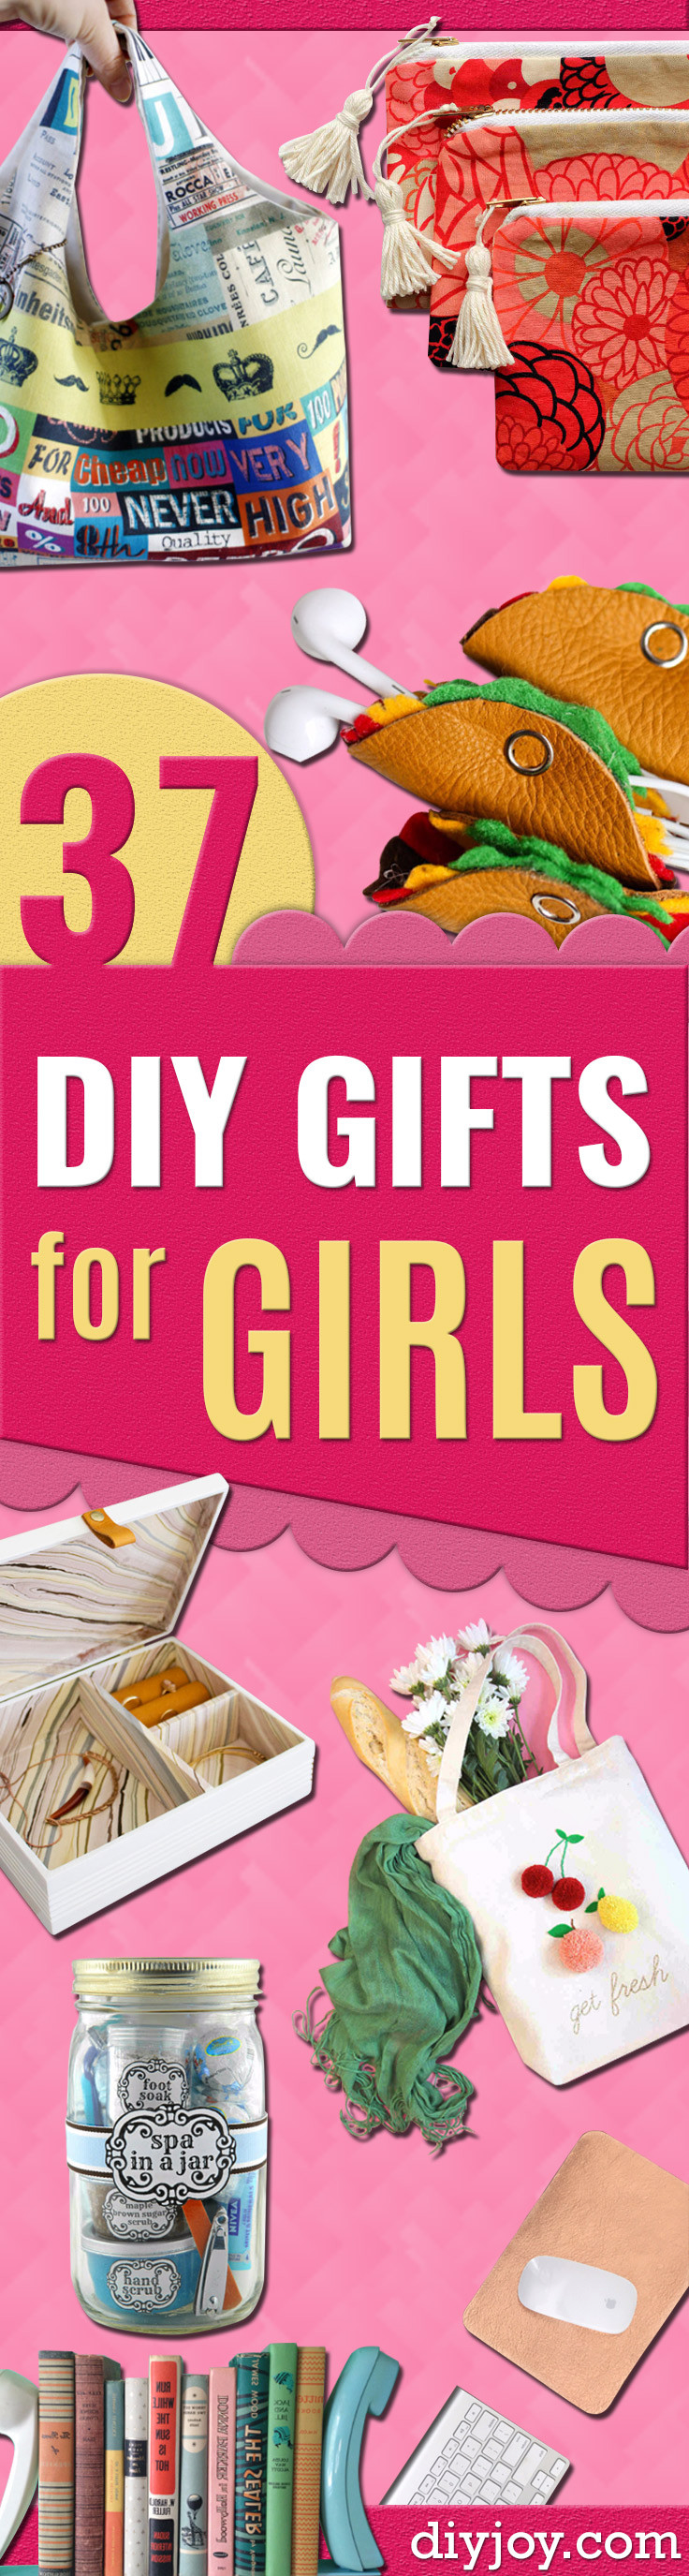 DIY Gifts For Girls
 37 Best DIY Gifts for Girls